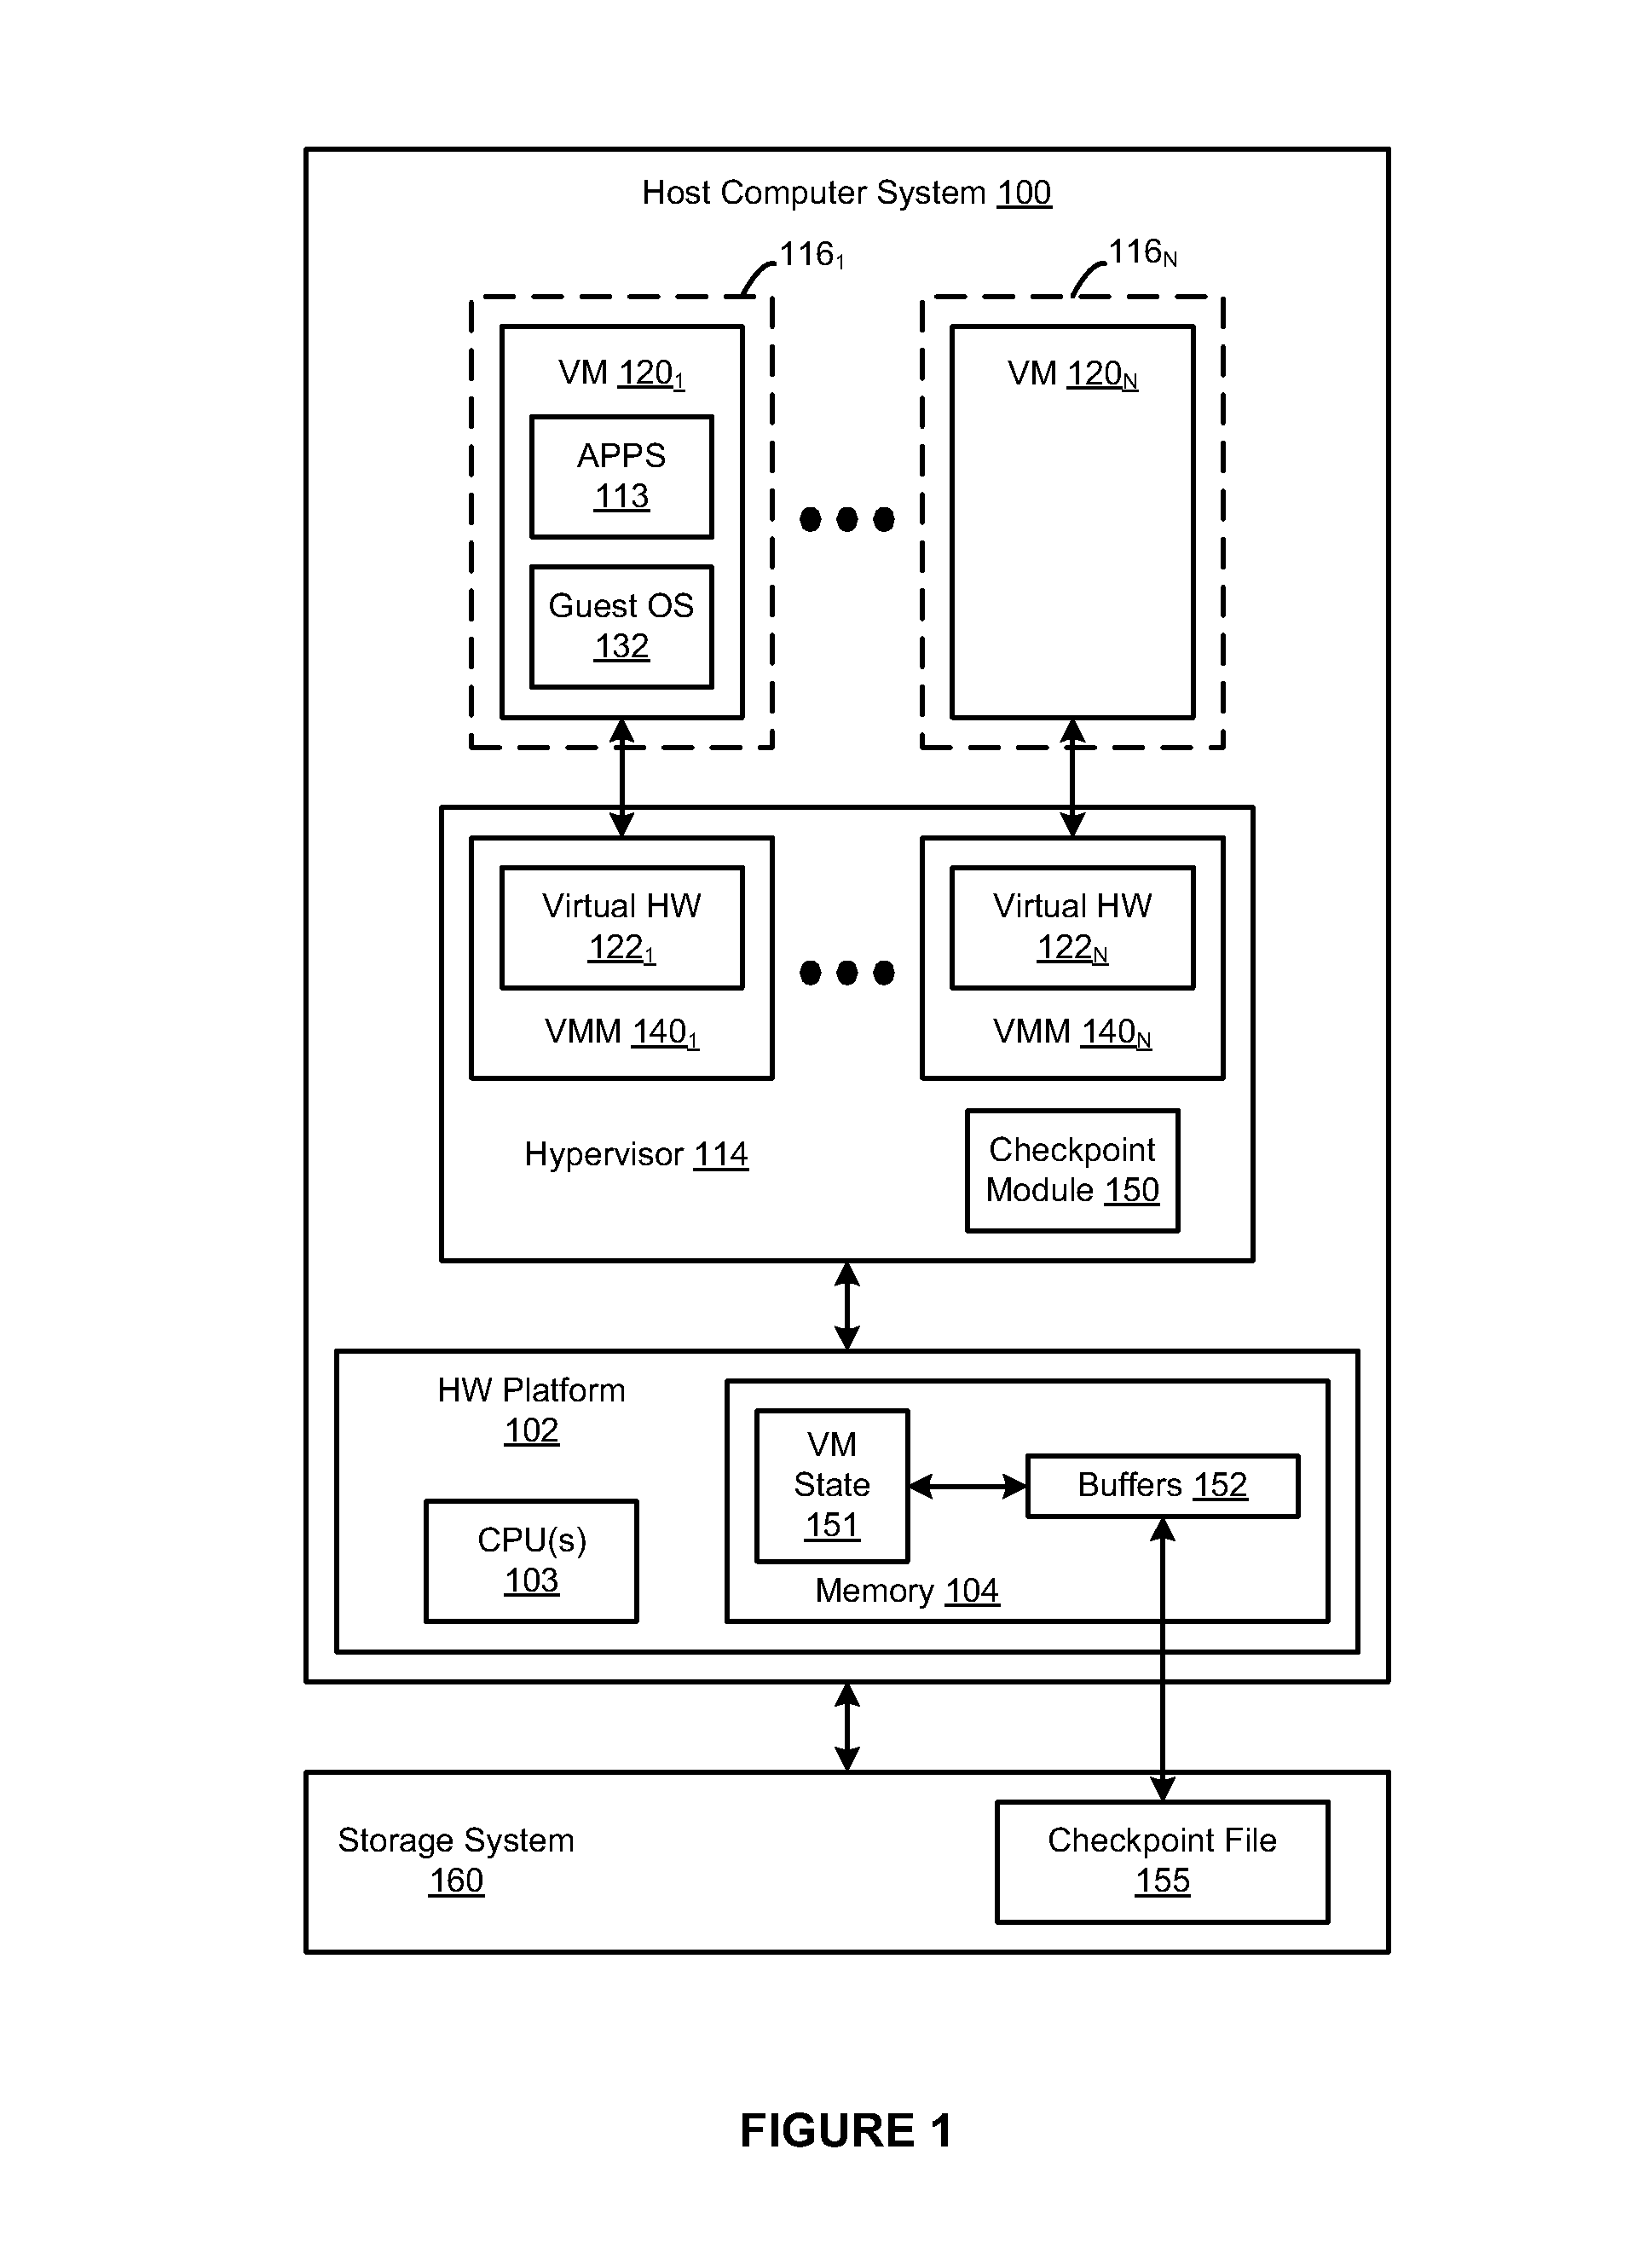 Method for saving virtual machine state to a checkpoint file